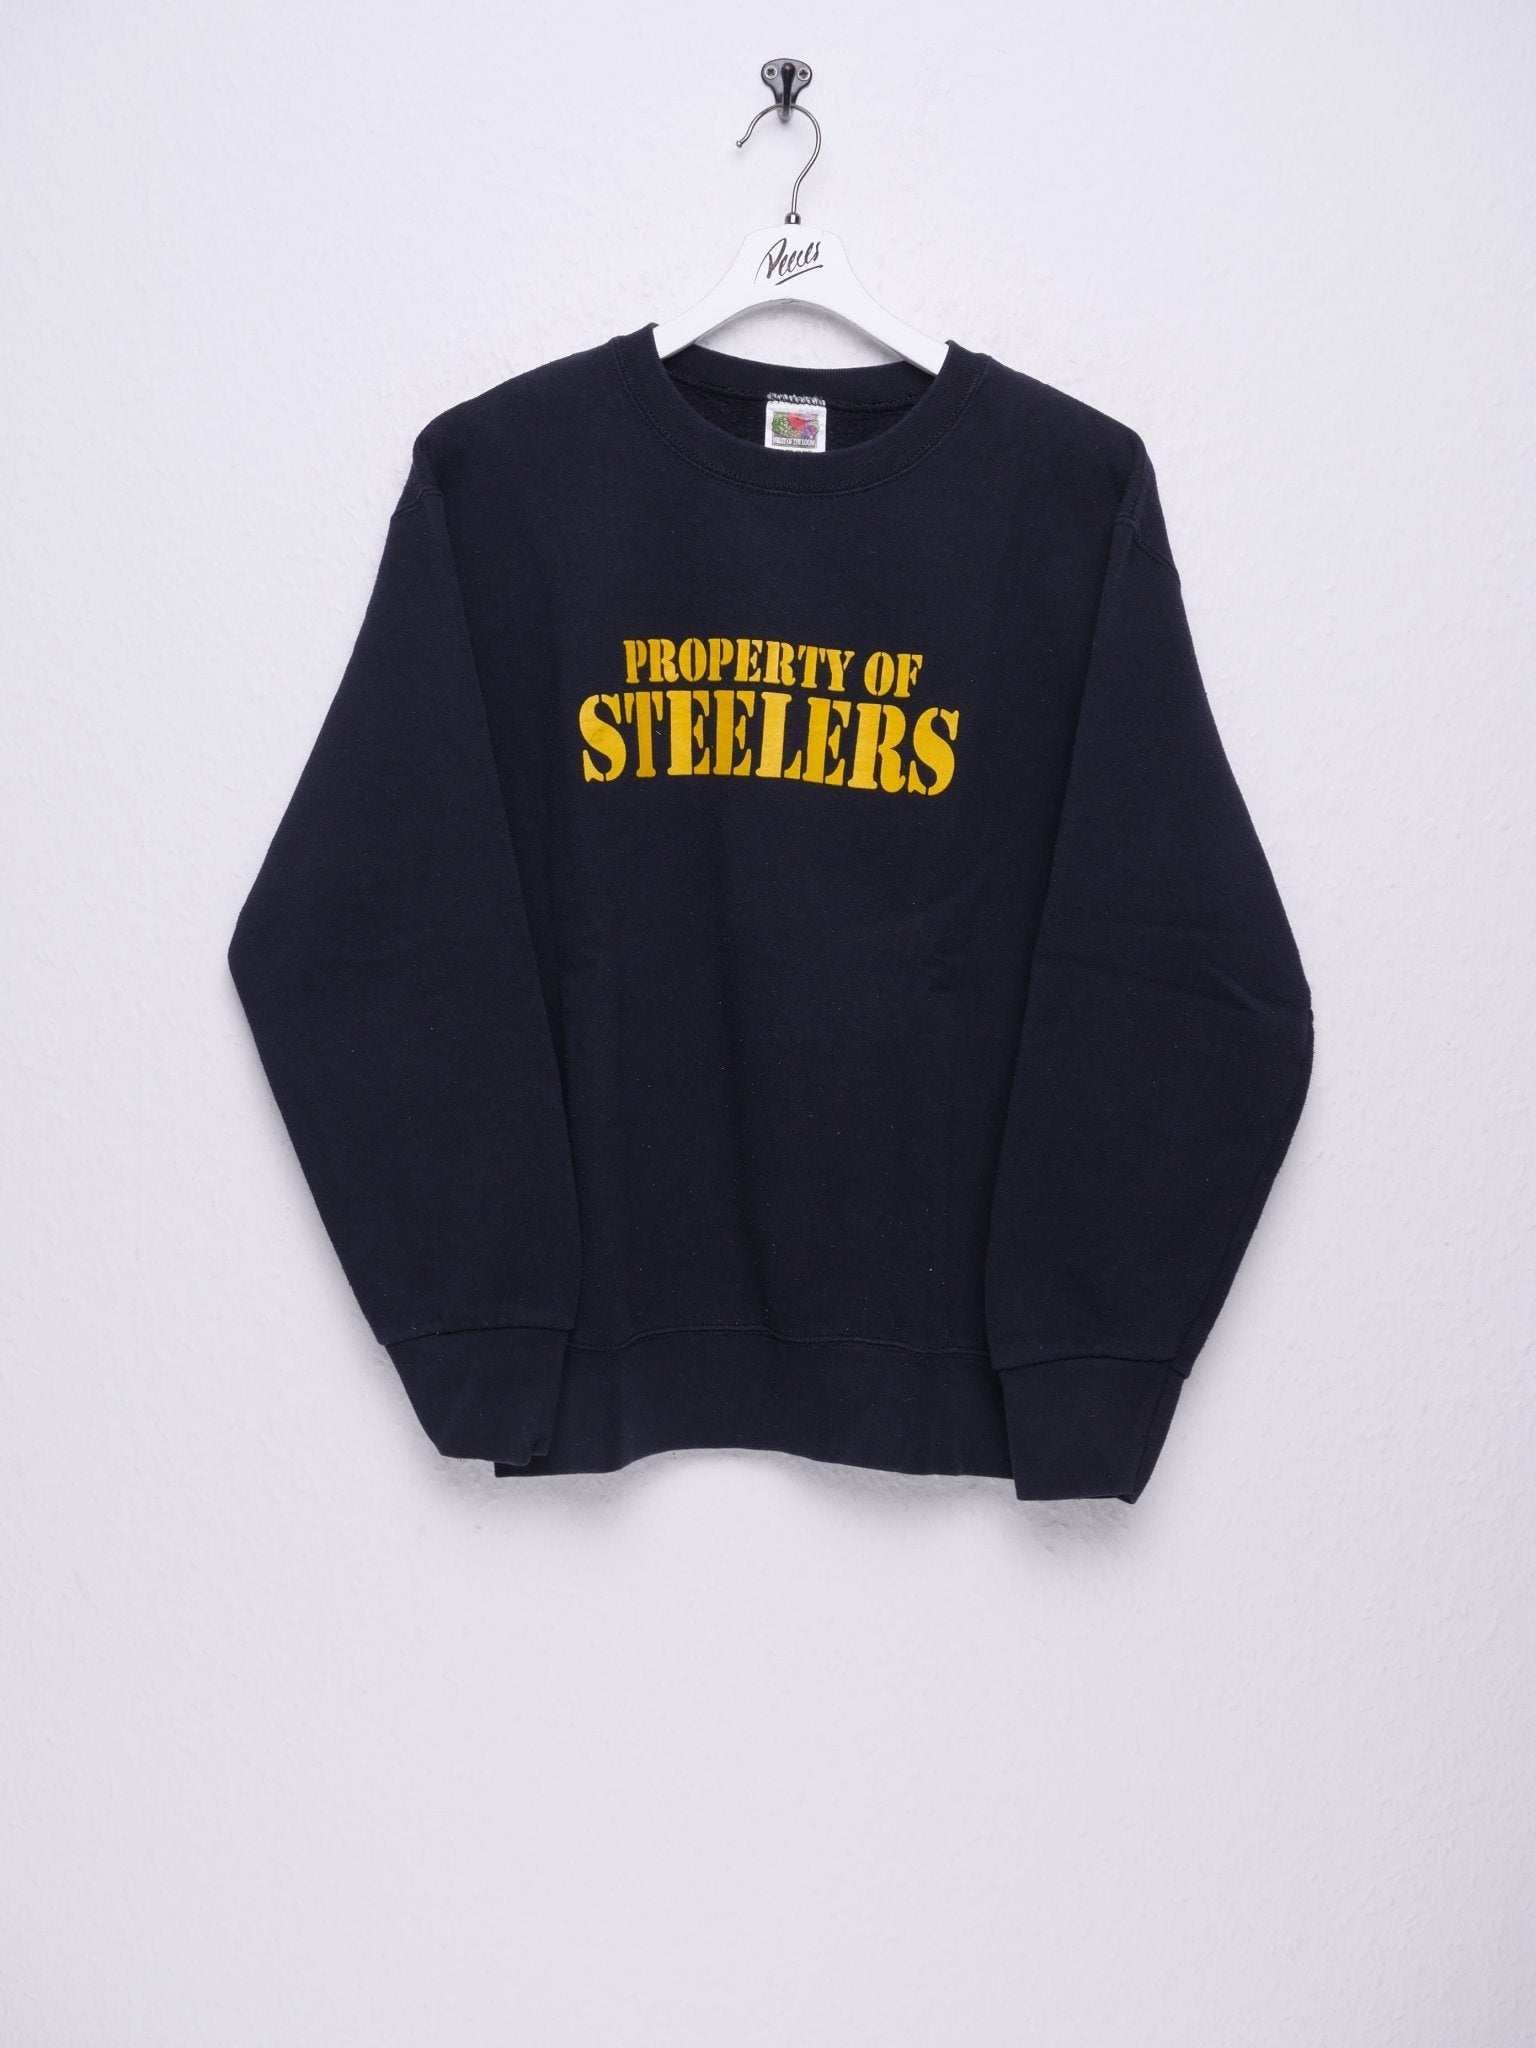 printed Steelers Spellout black Sweater - Peeces